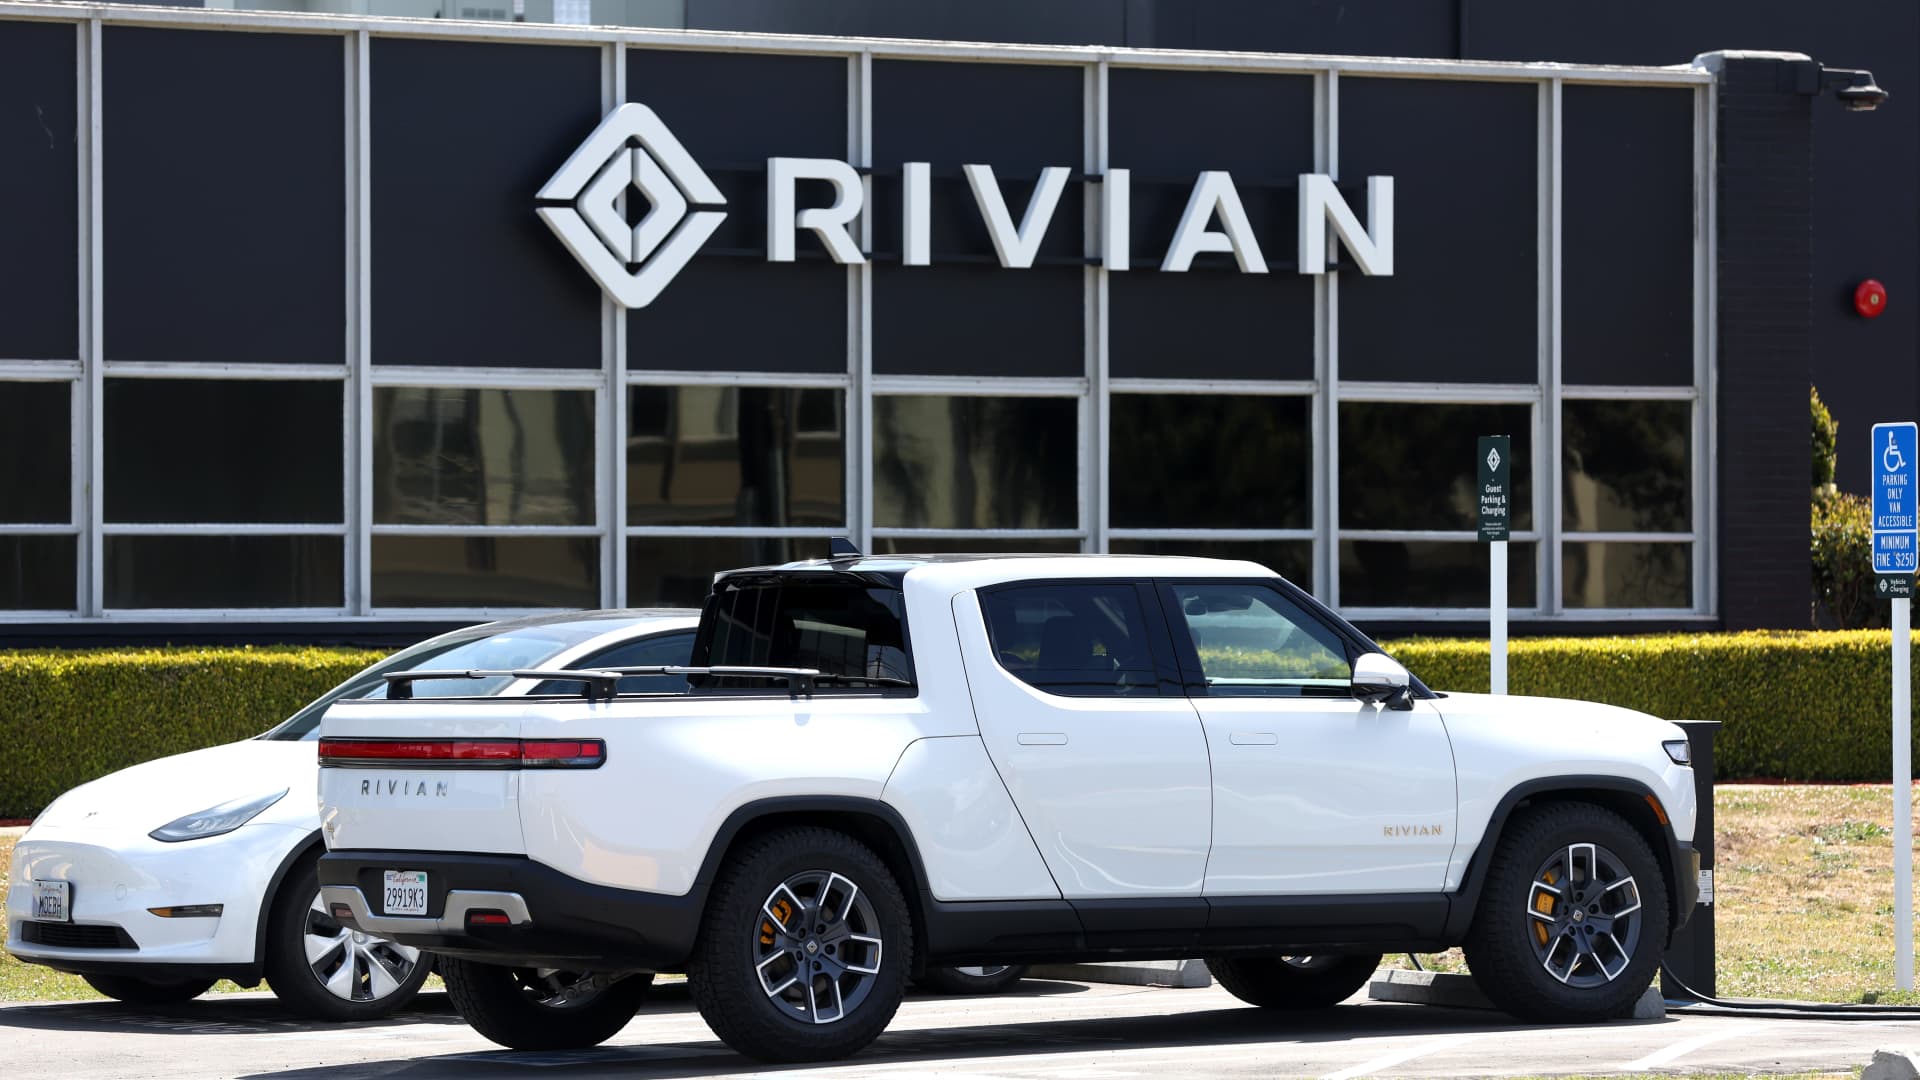 Rivian electric pickup trucks sit in a parking lot at a Rivian service center on May 09, 2022 in South San Francisco, California. 